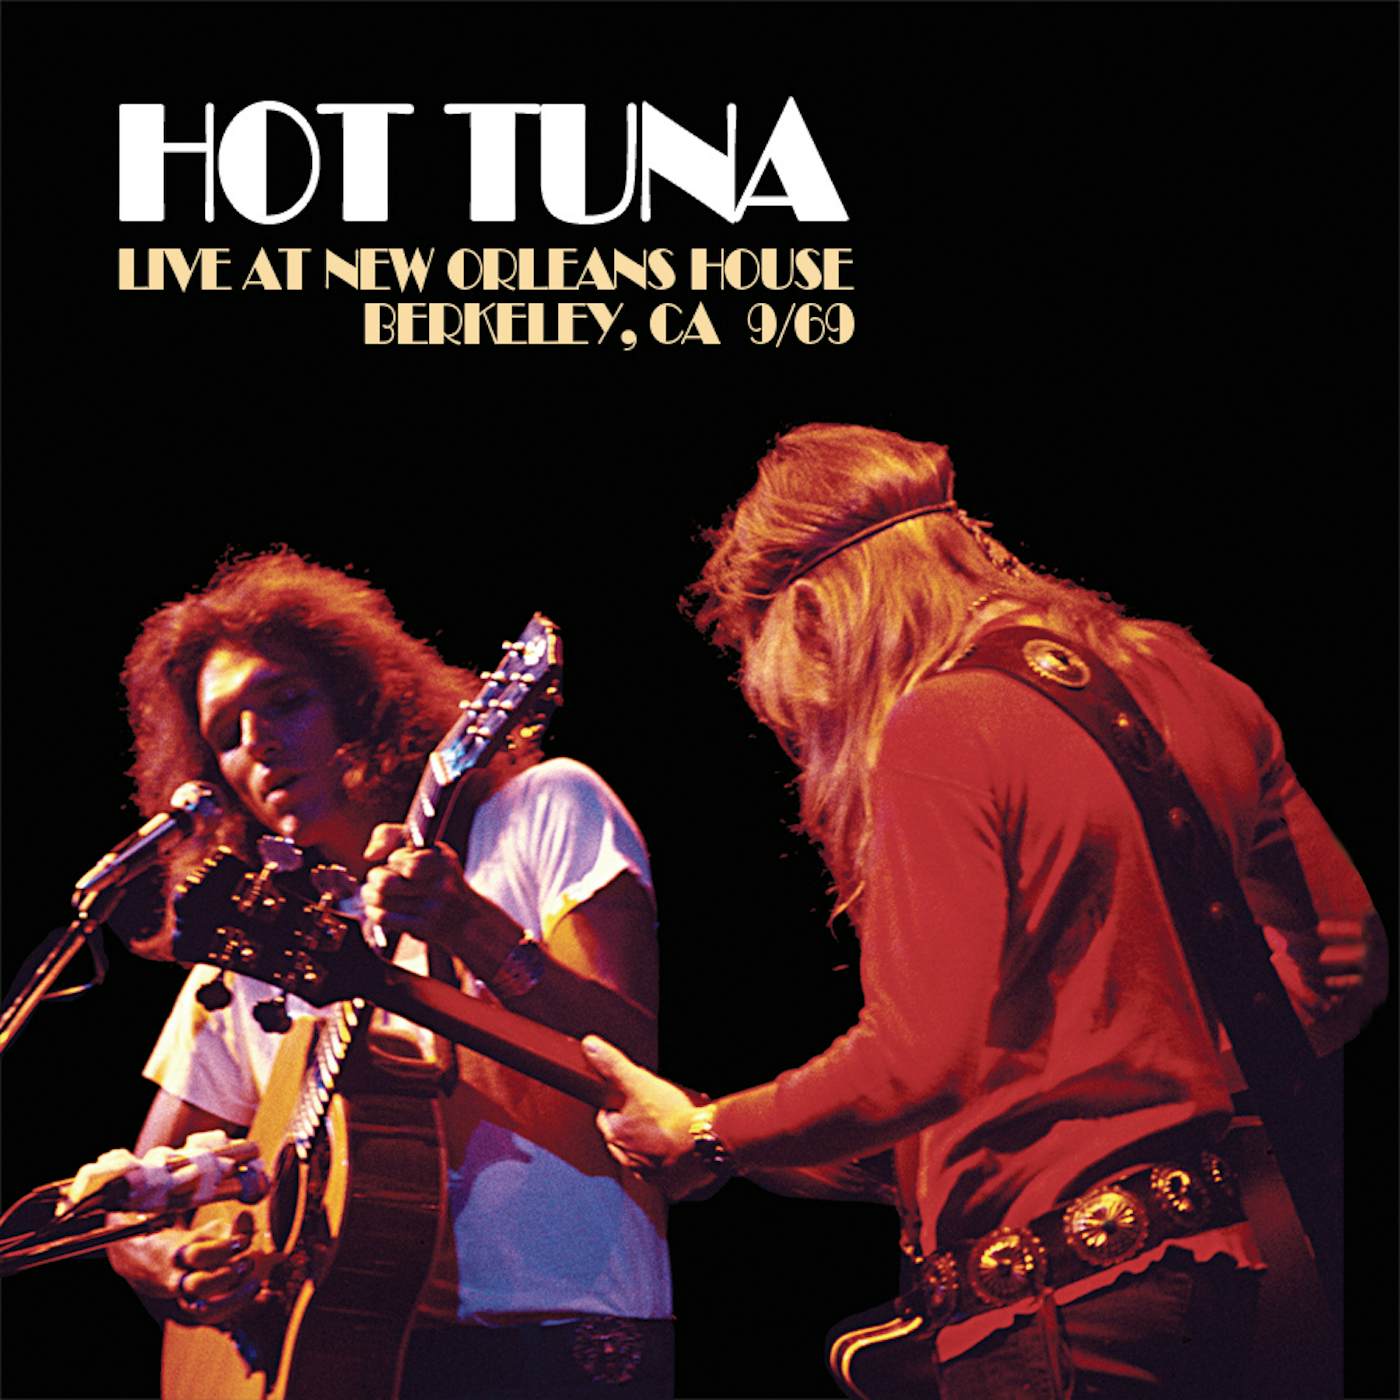 Hot Tuna LIVE AT NEW ORLEANS HOUSE BERKELEY CA 9/69 CD